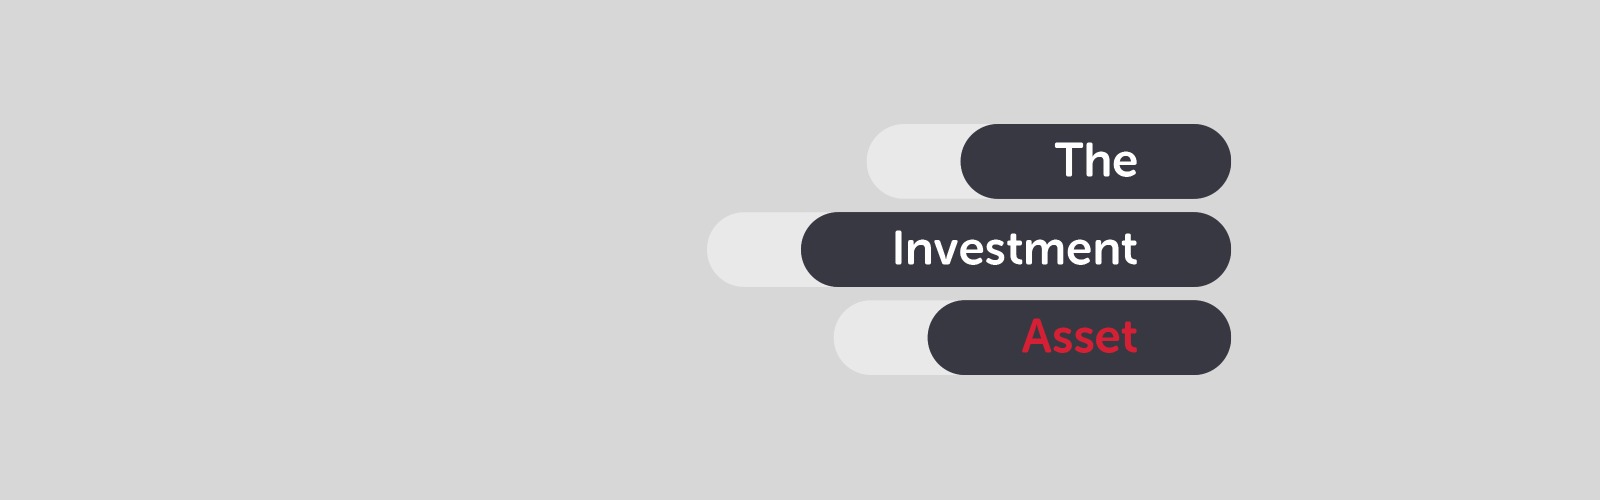 The Investment Asset